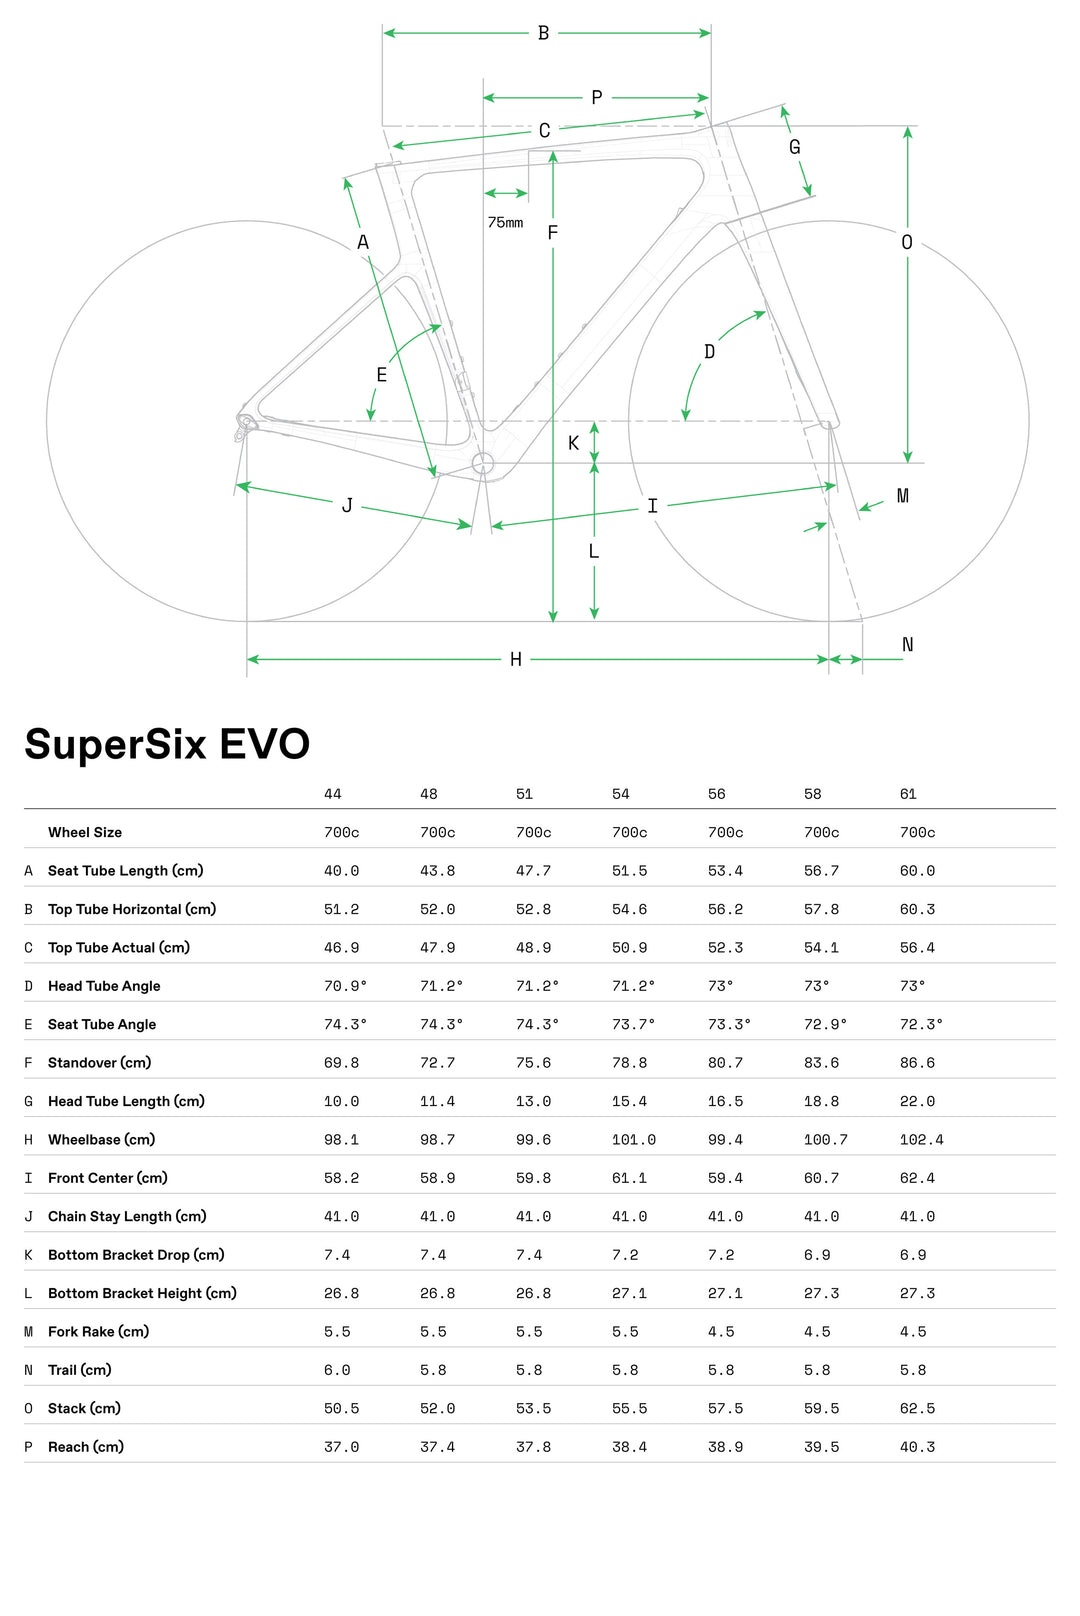 A geometry chart for the Cannondale SuperSix EVO.